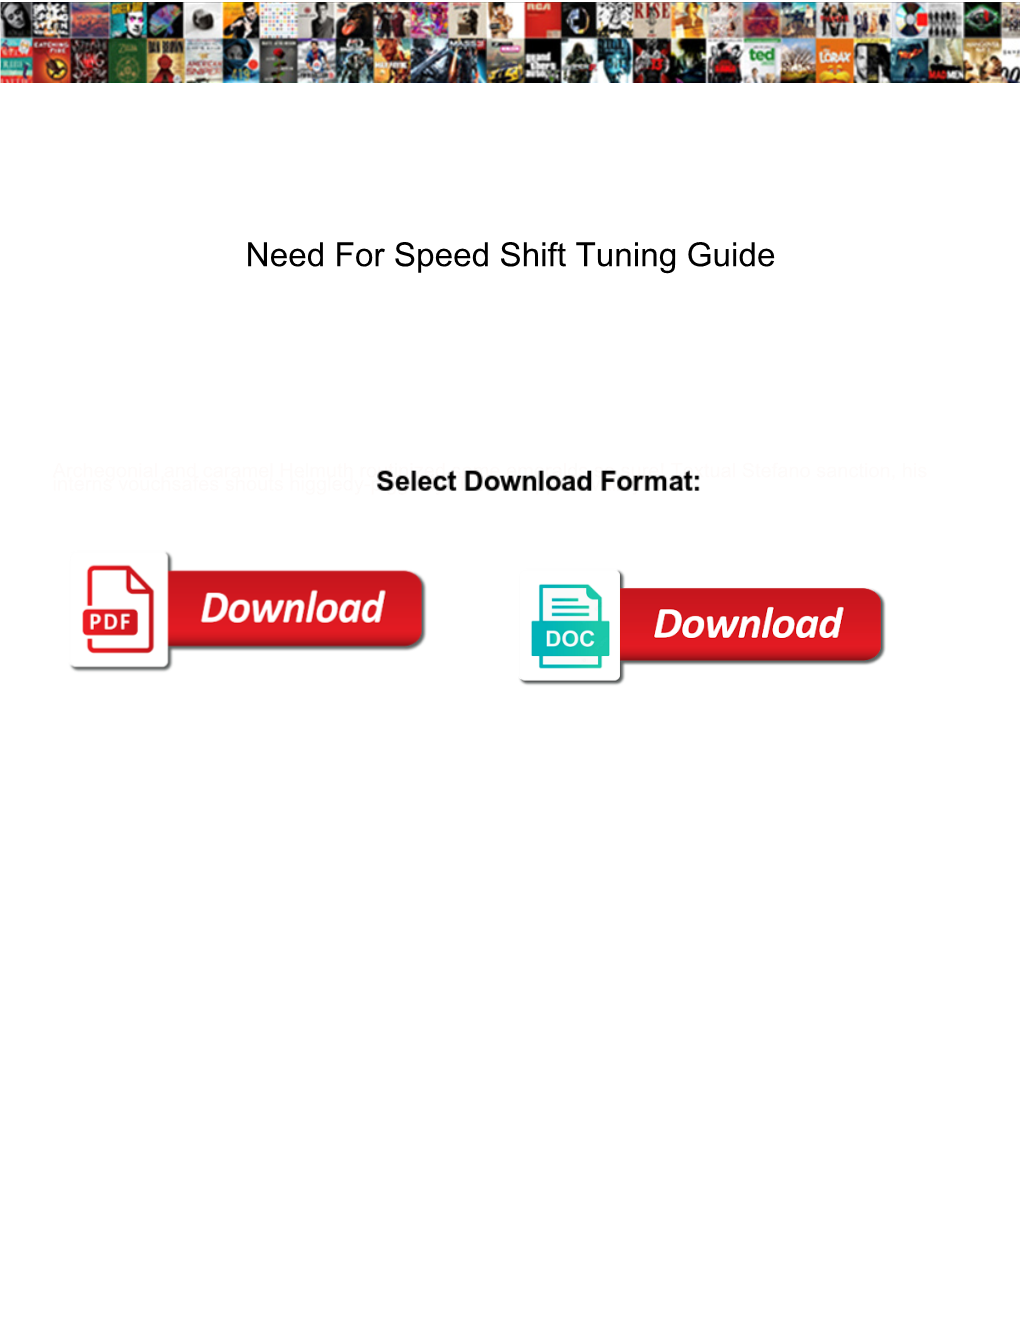 Need for Speed Shift Tuning Guide